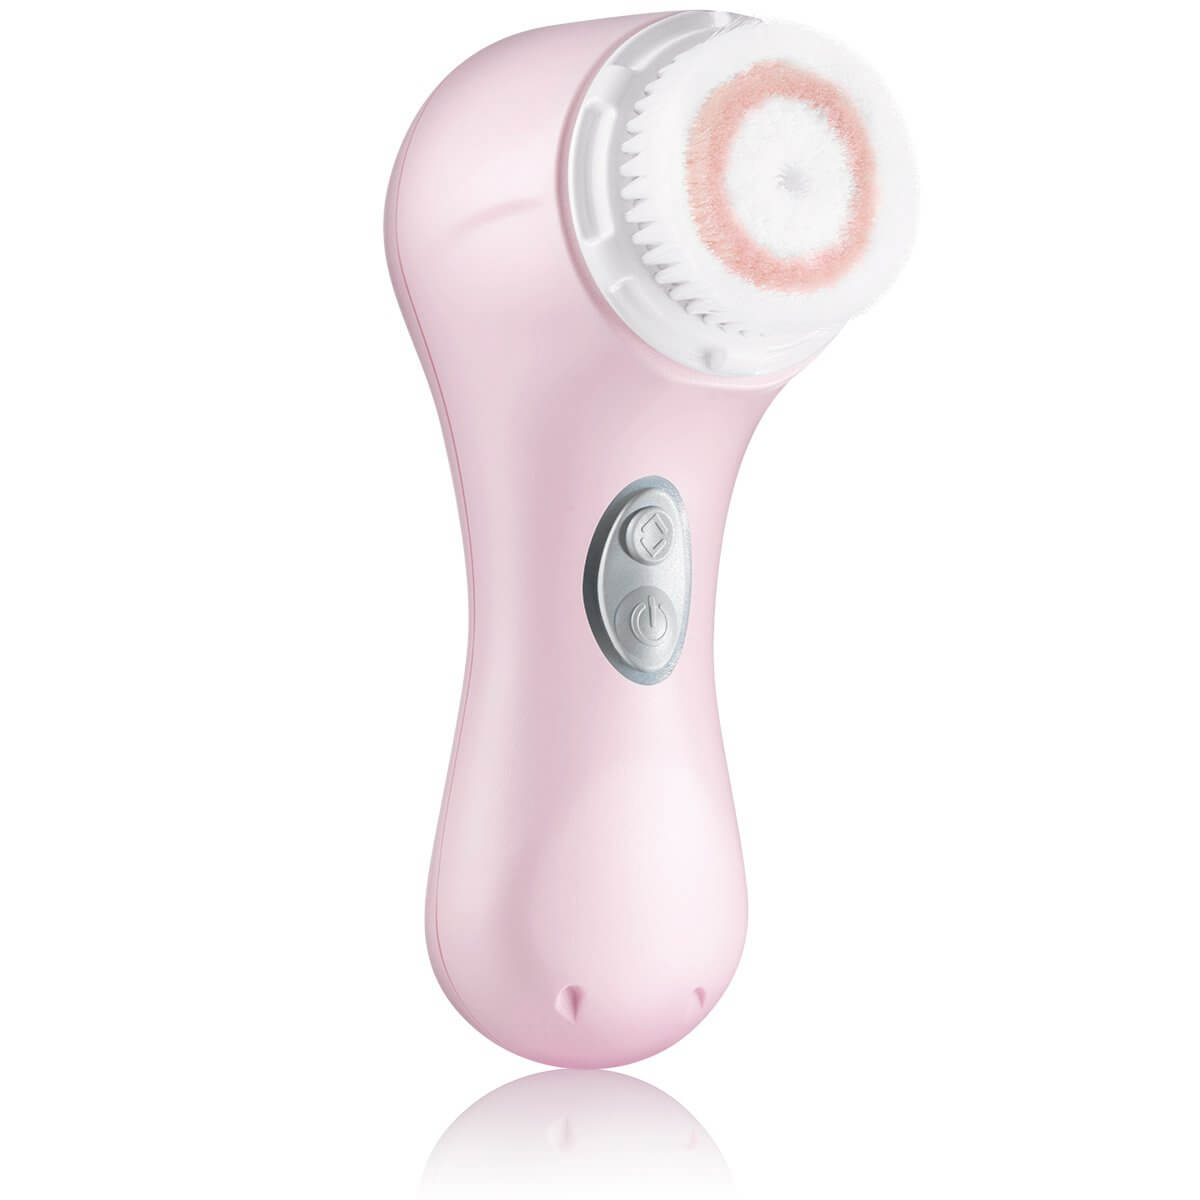 Clarisonic Facial Cleansing Massager Device